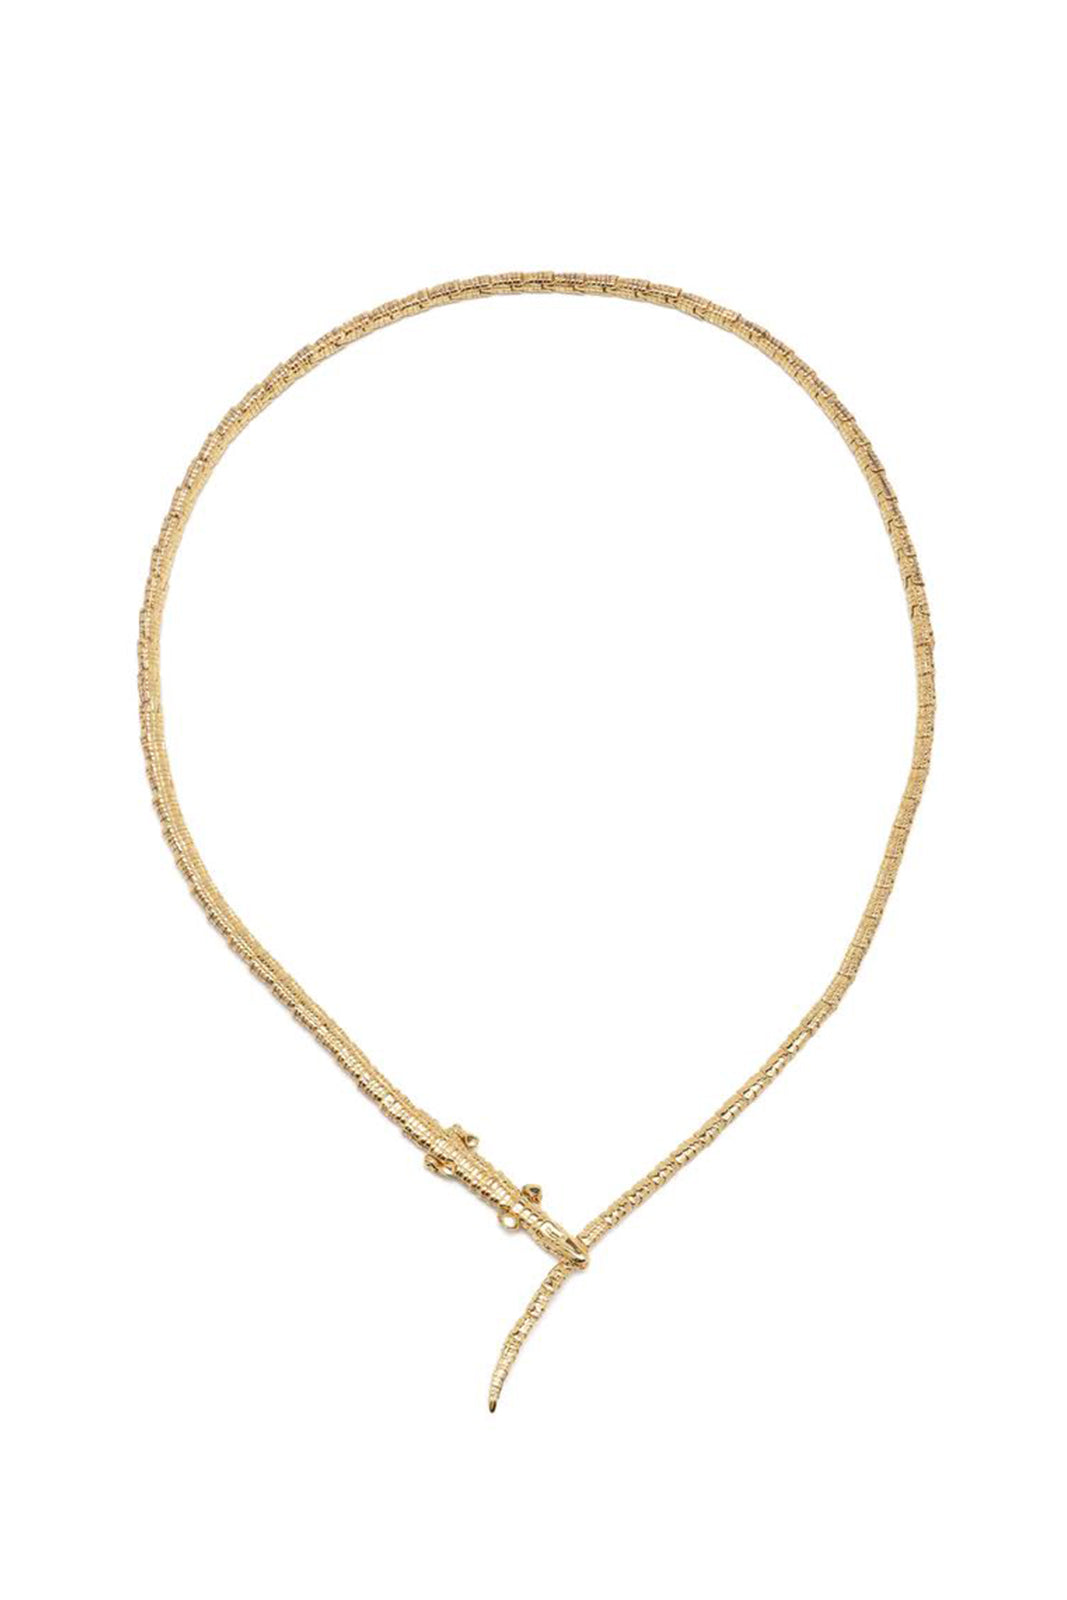 18K Yellow Gold Thin Alligator Wrap Necklace